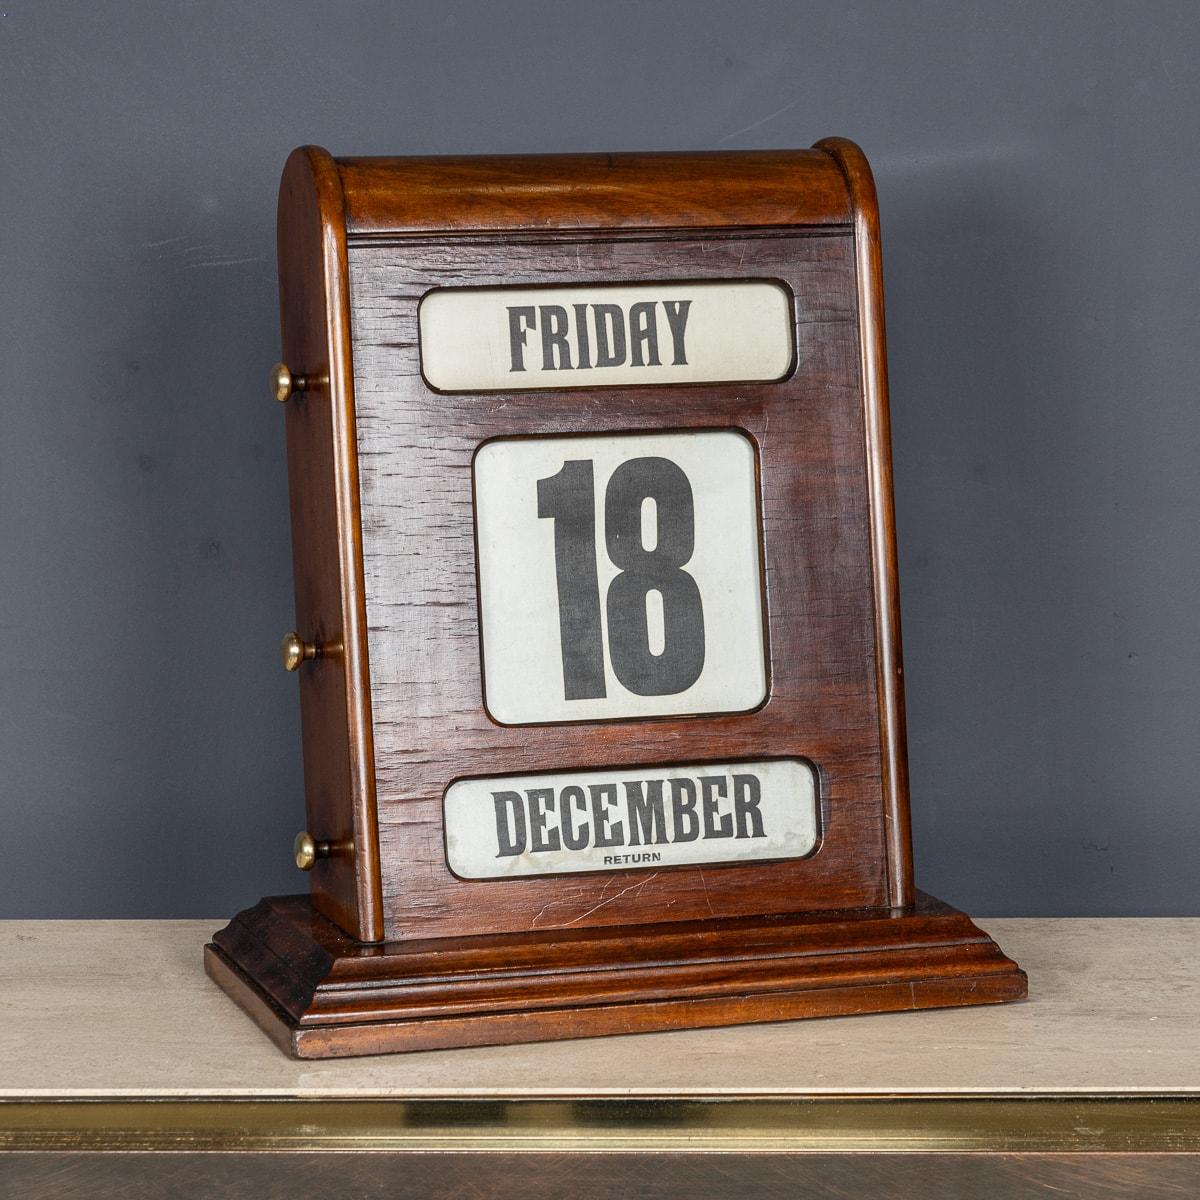 Vintage mid-20th Century perpetual desk calendar, made from mahogany and brass. Featuring three knobs to each side, these are used to move forward and rewind the day, date and month behind three glazed apertures. A real conversation piece and a